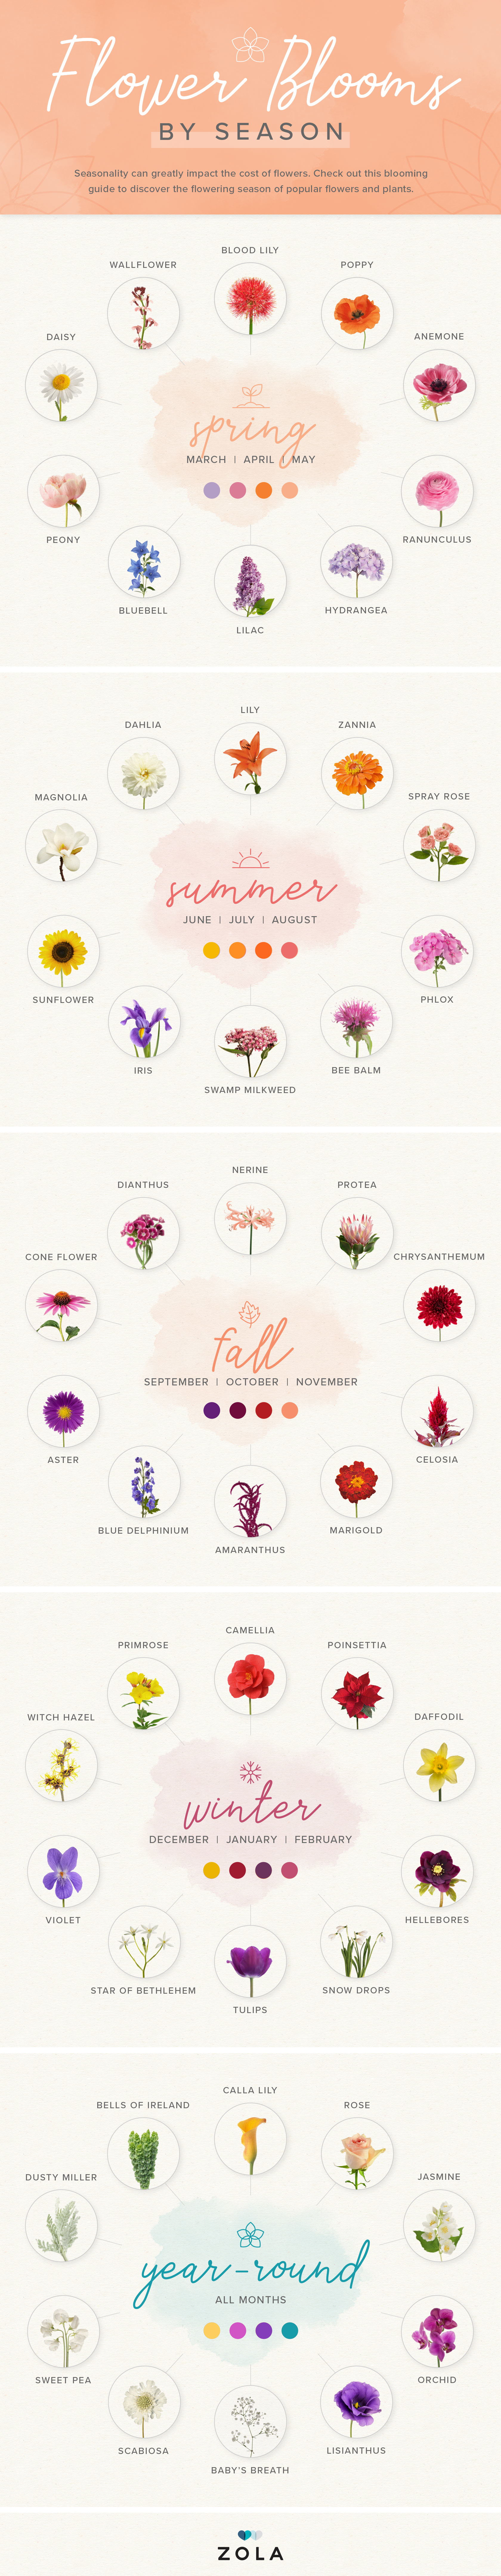 A Seasonal Guide to Minimize Your Wedding Flower Costs. Flower Blooms by Season Infographic: Spring, Summer, Fall, Winter and Year-Round Popular Flowers. // mysweetengagement.com